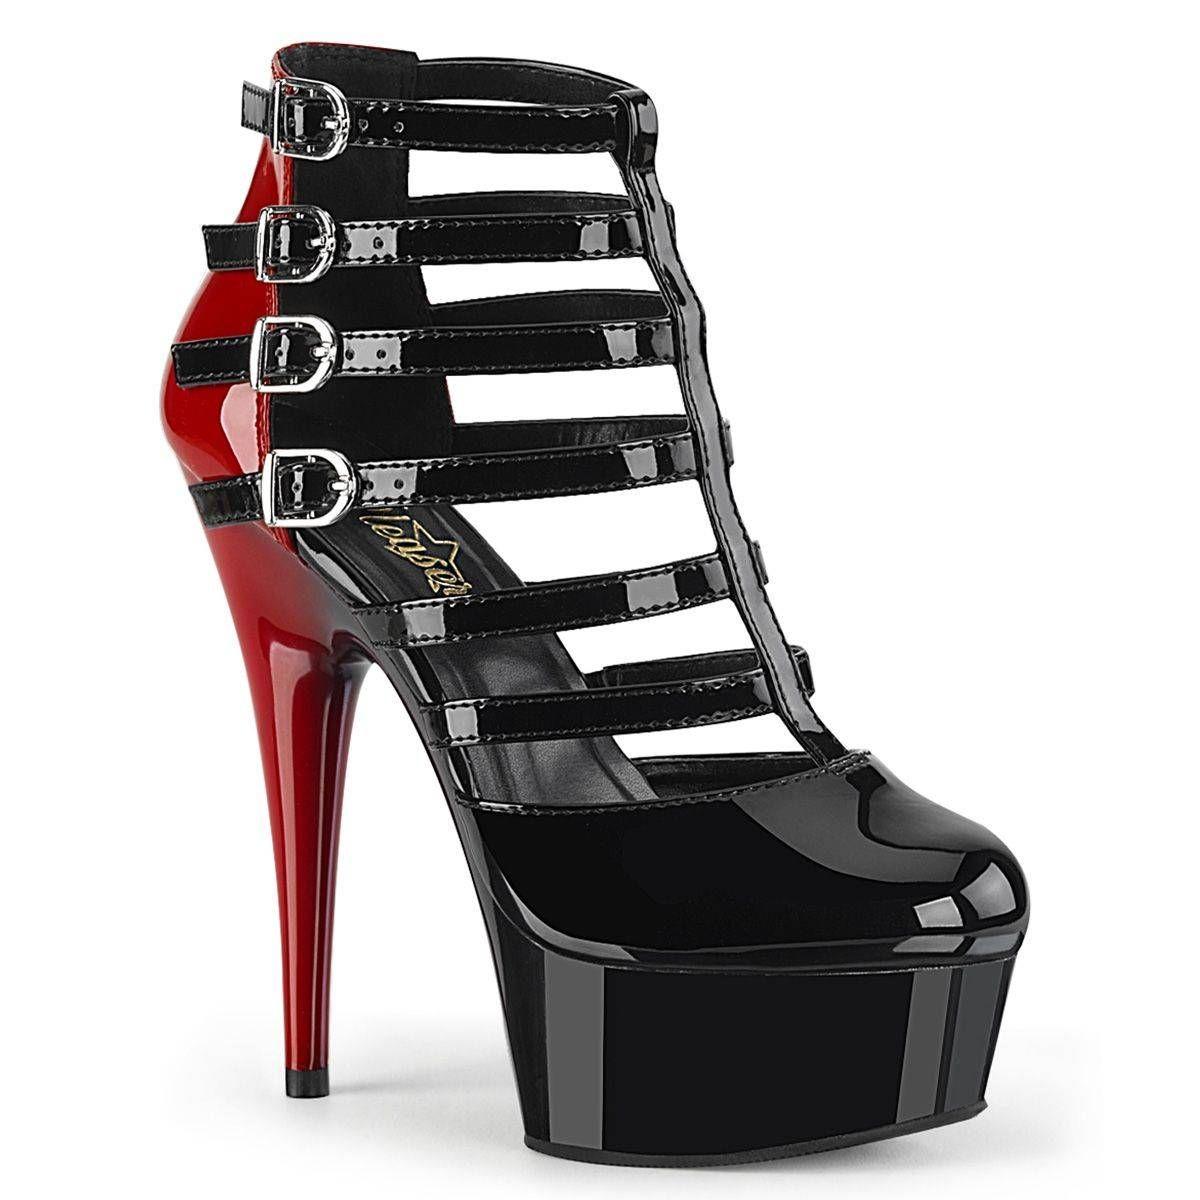 Red & Black Patent Sandals With Stiletto Heels